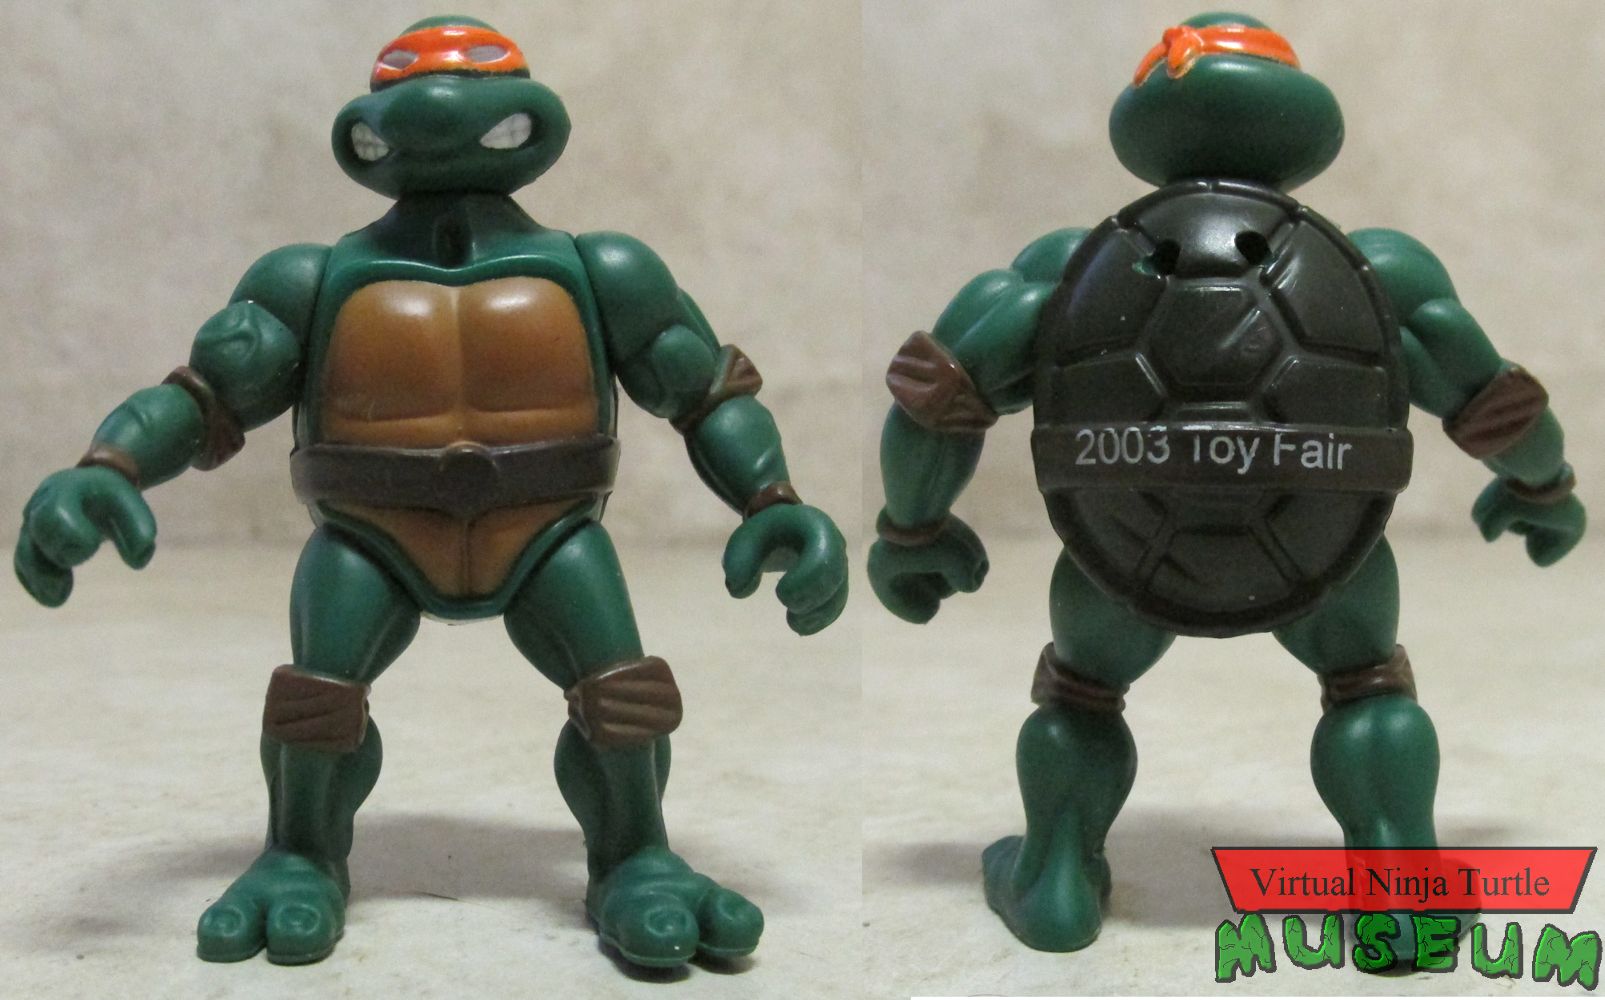 Toy Fair Promotional Michelangelo Keychain front and back